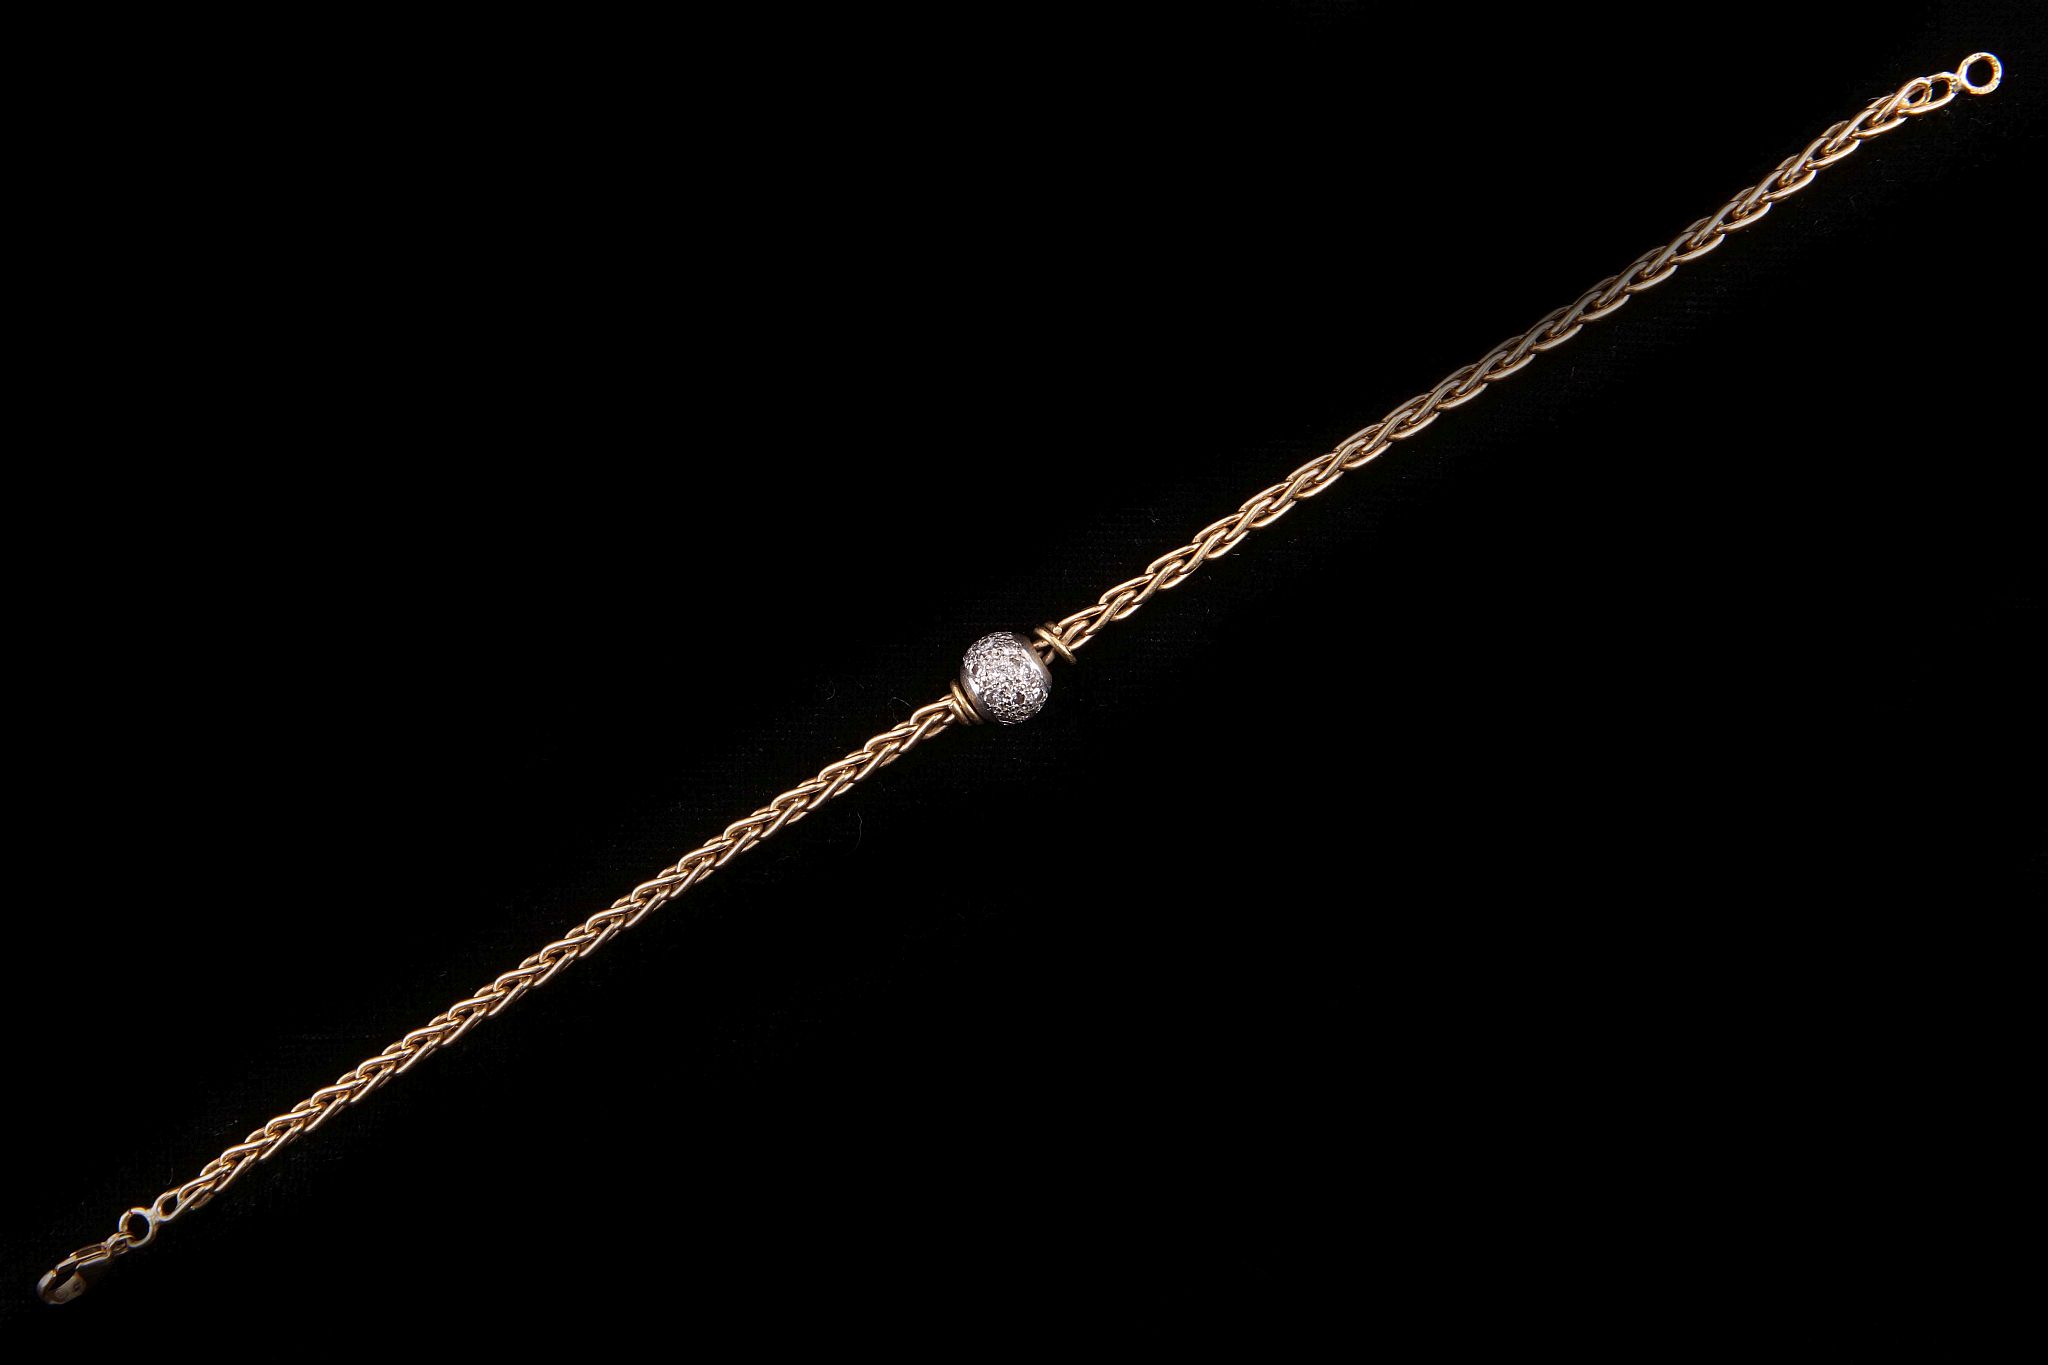 An 18 carat gold and diamond ball bracelet, the foxtail link chain with a pave set diamond ball to - Image 2 of 2